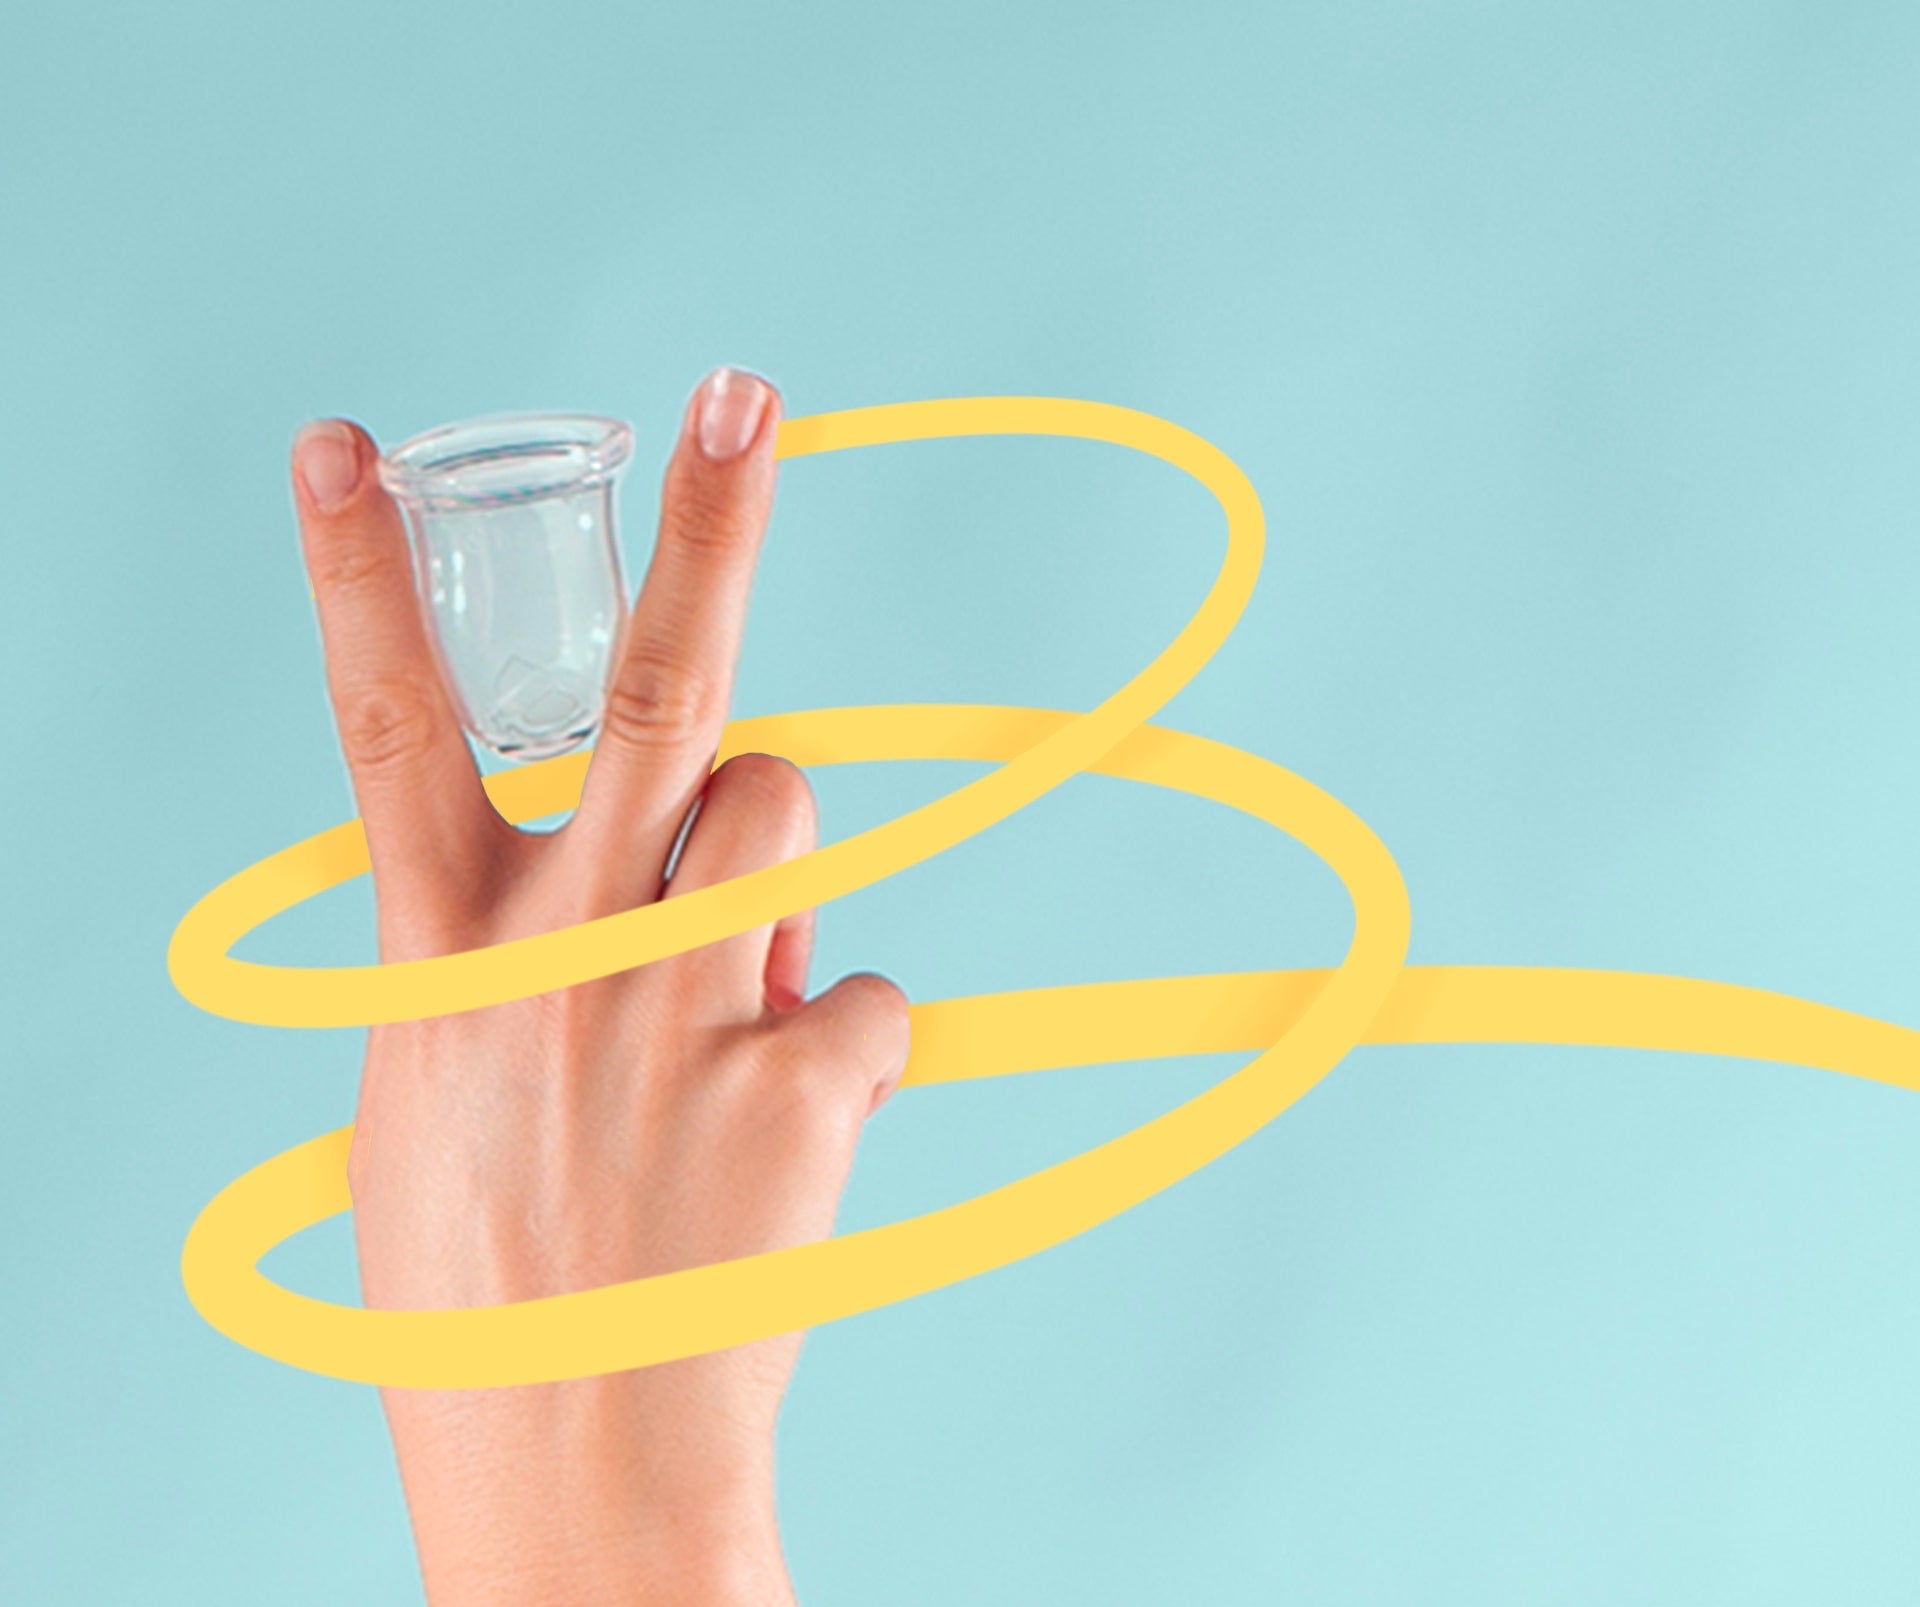 how to place the menstrual cup